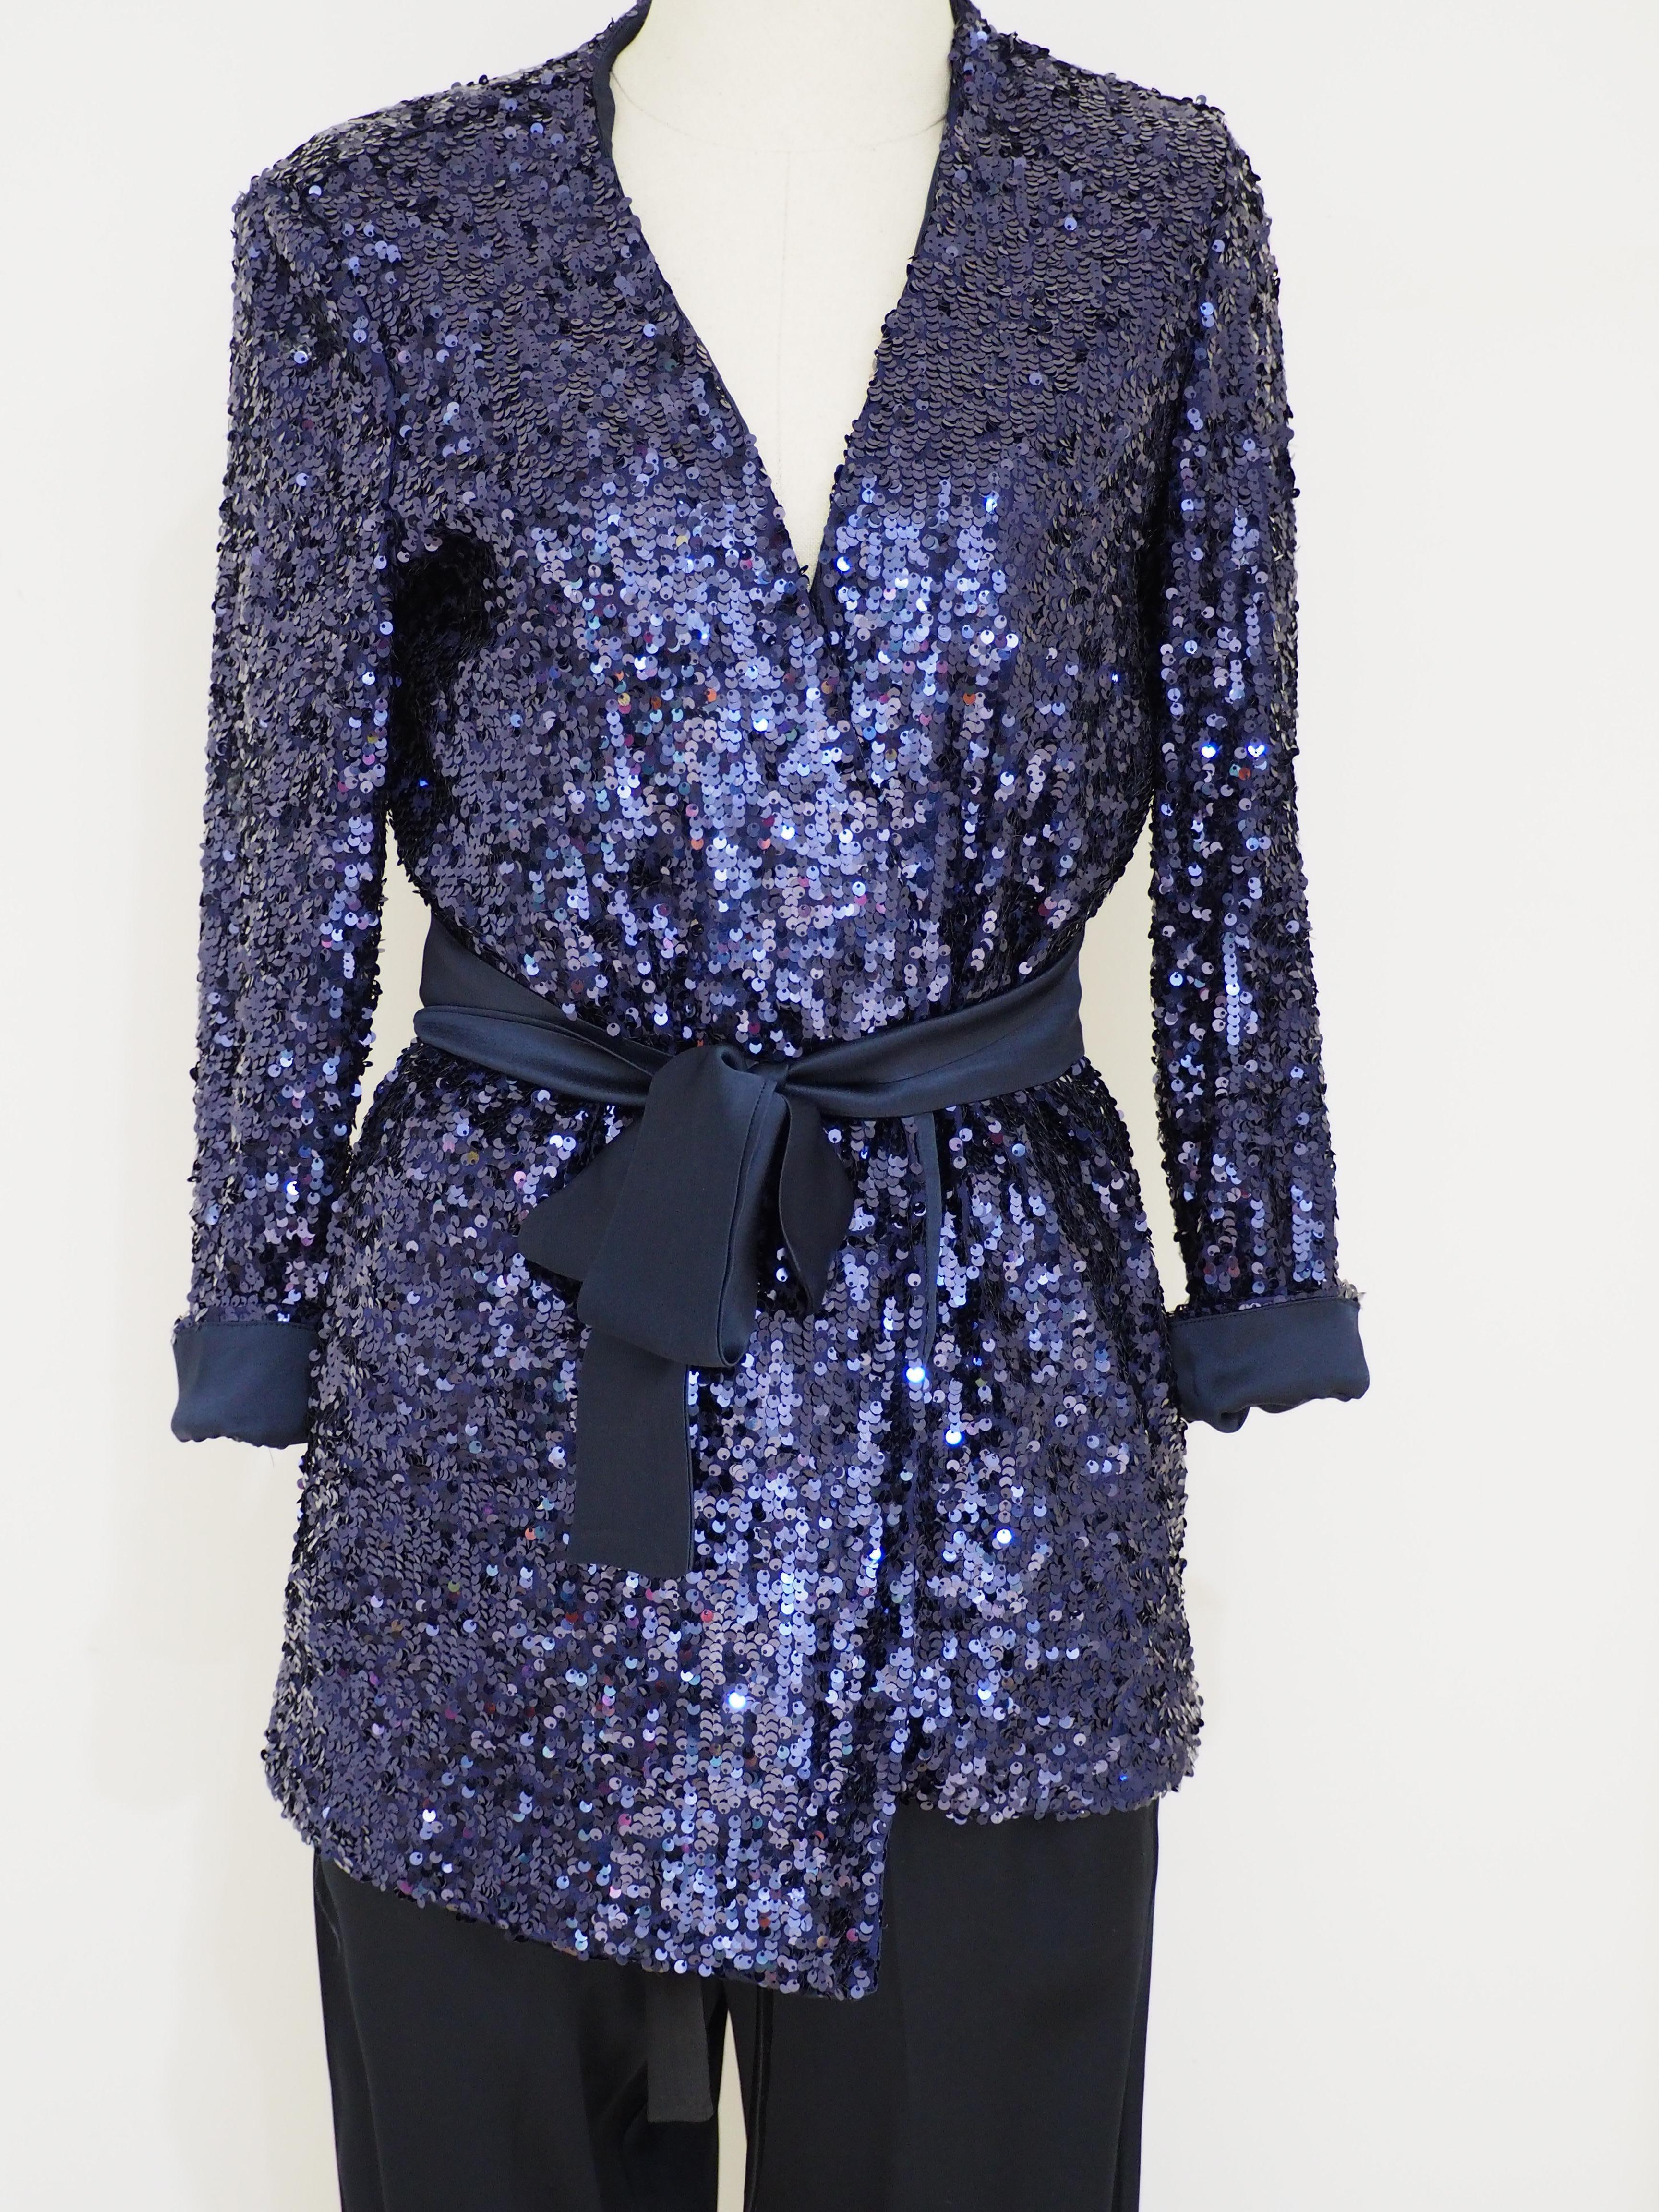 Marella blouse and pants suit 
Blue sequins blouse with black belt and dark blue pants suit made in italt in size 42
